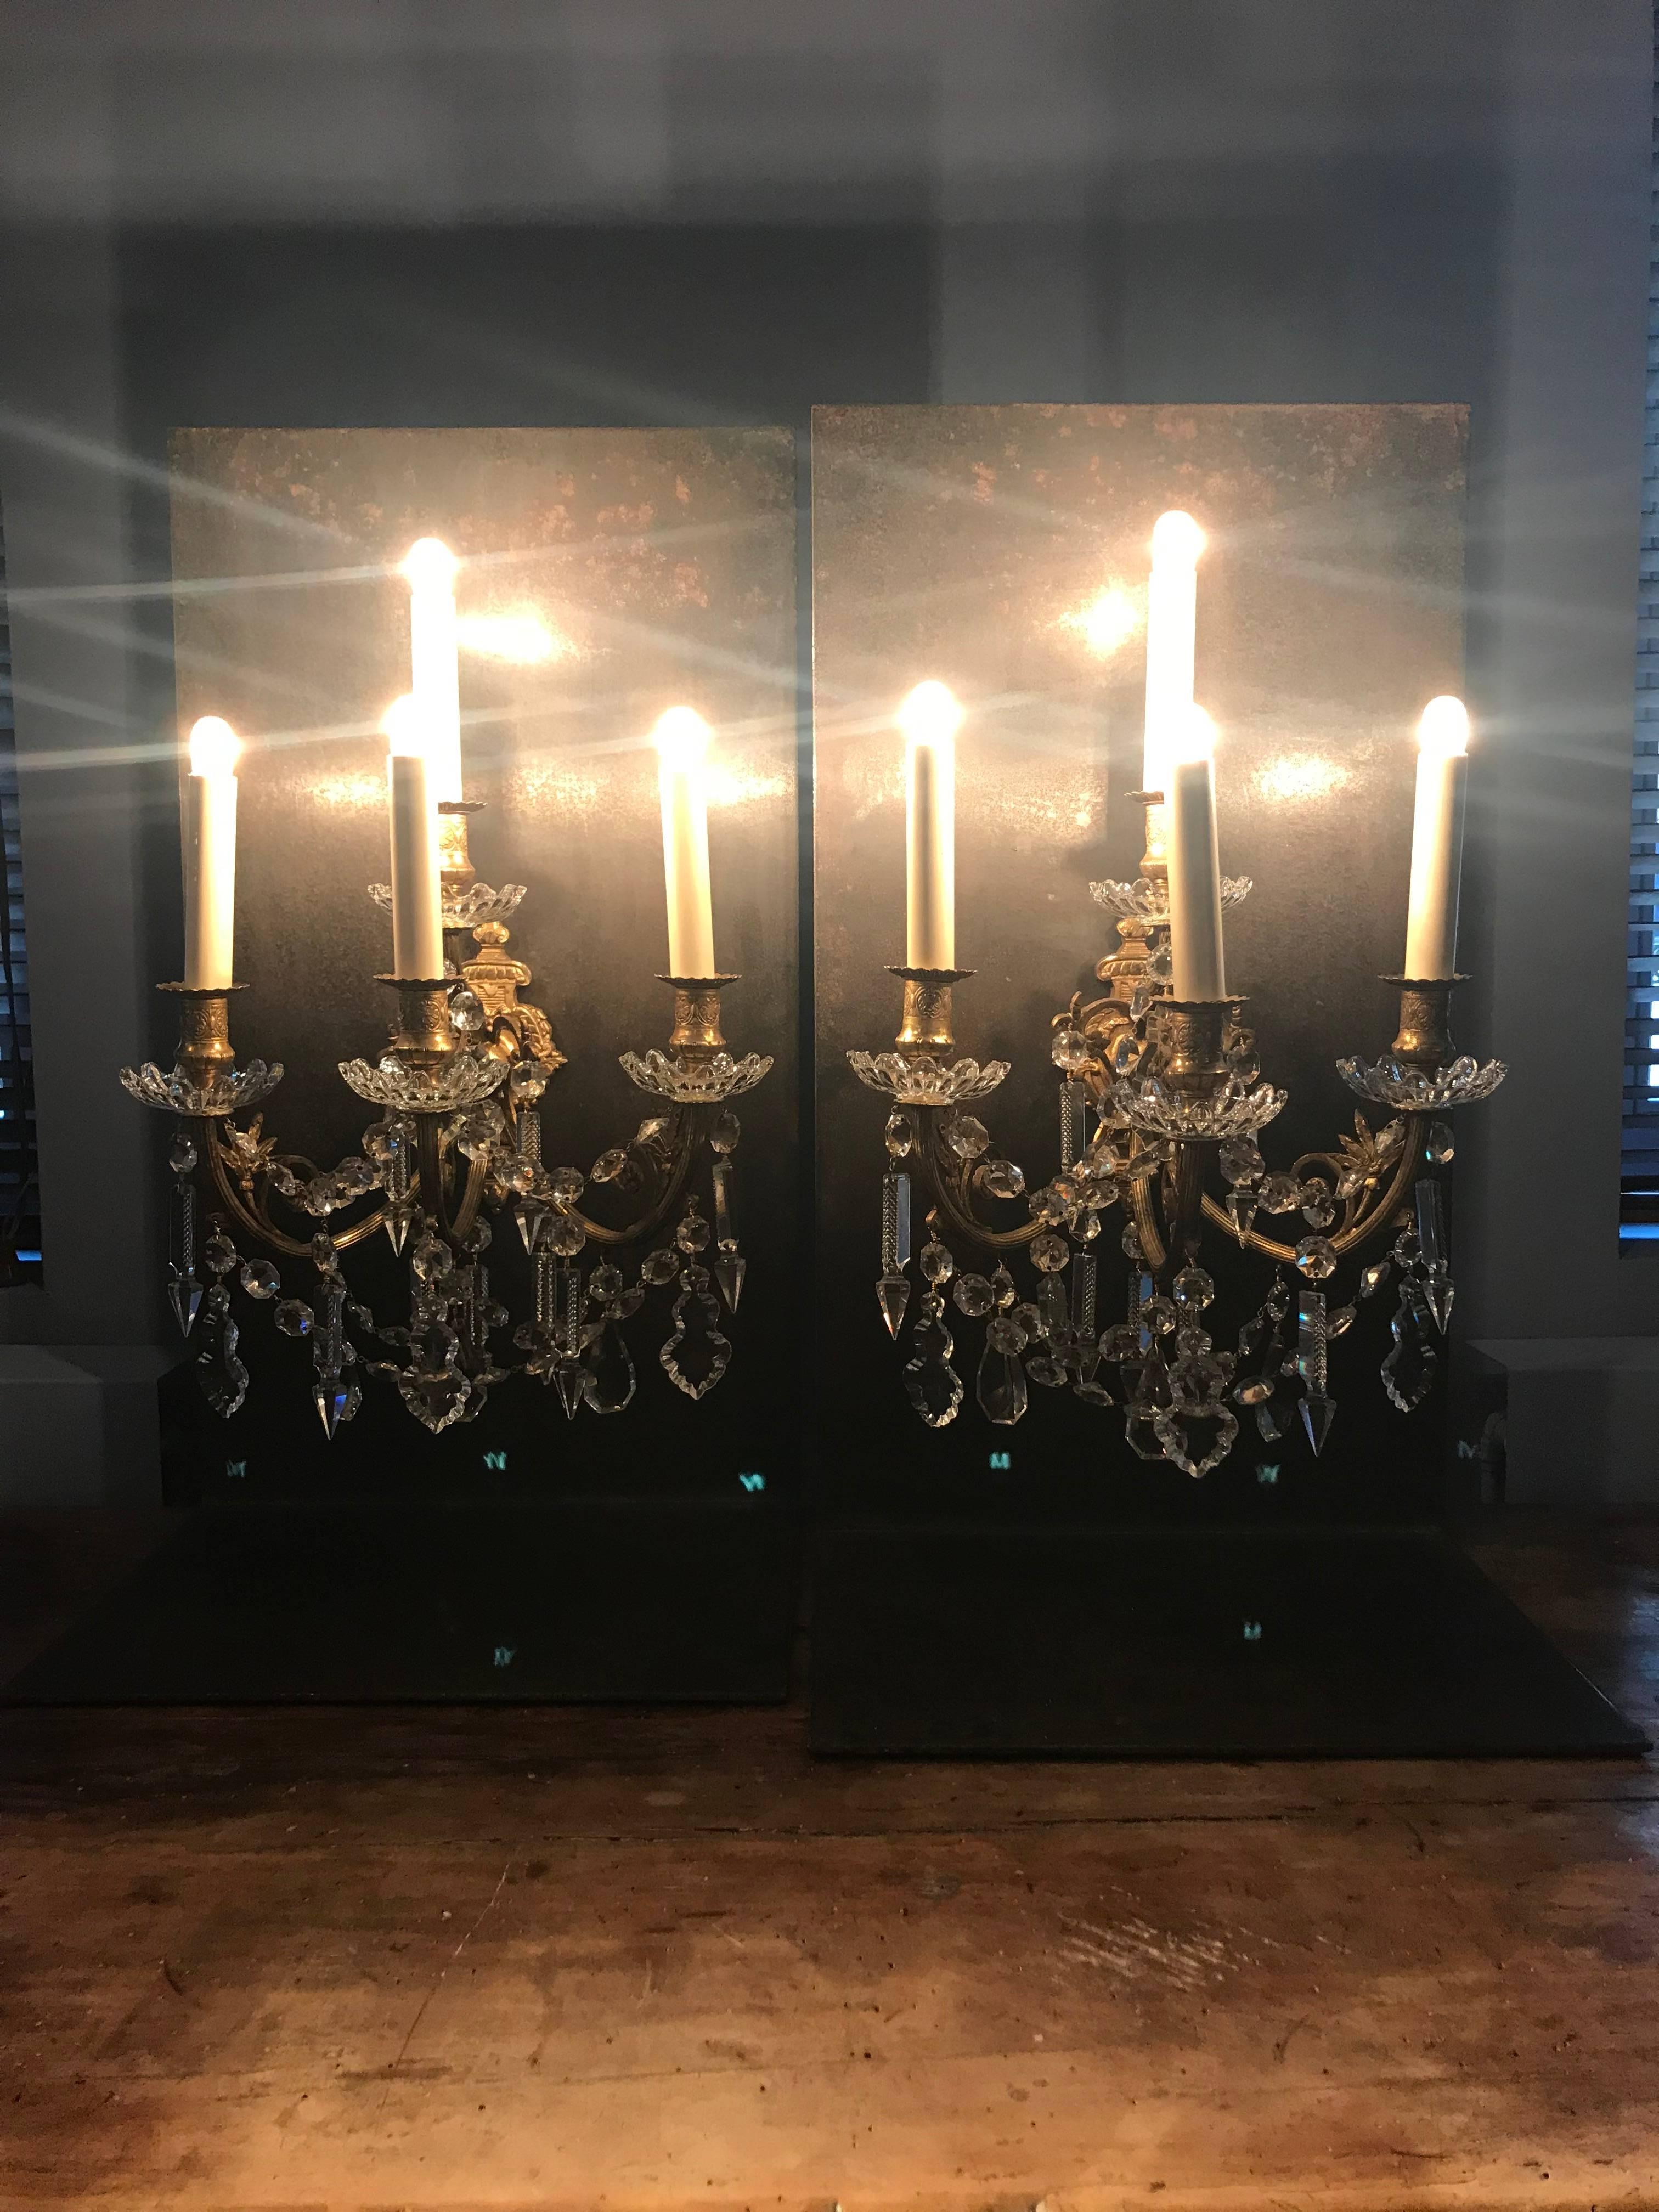 Elegant Pair of French Antique Crystal Girandoles,
mounted on an modern designed iron base,
fully restored and in perfect condition.
Four candleholders,
powerful, decorative objects